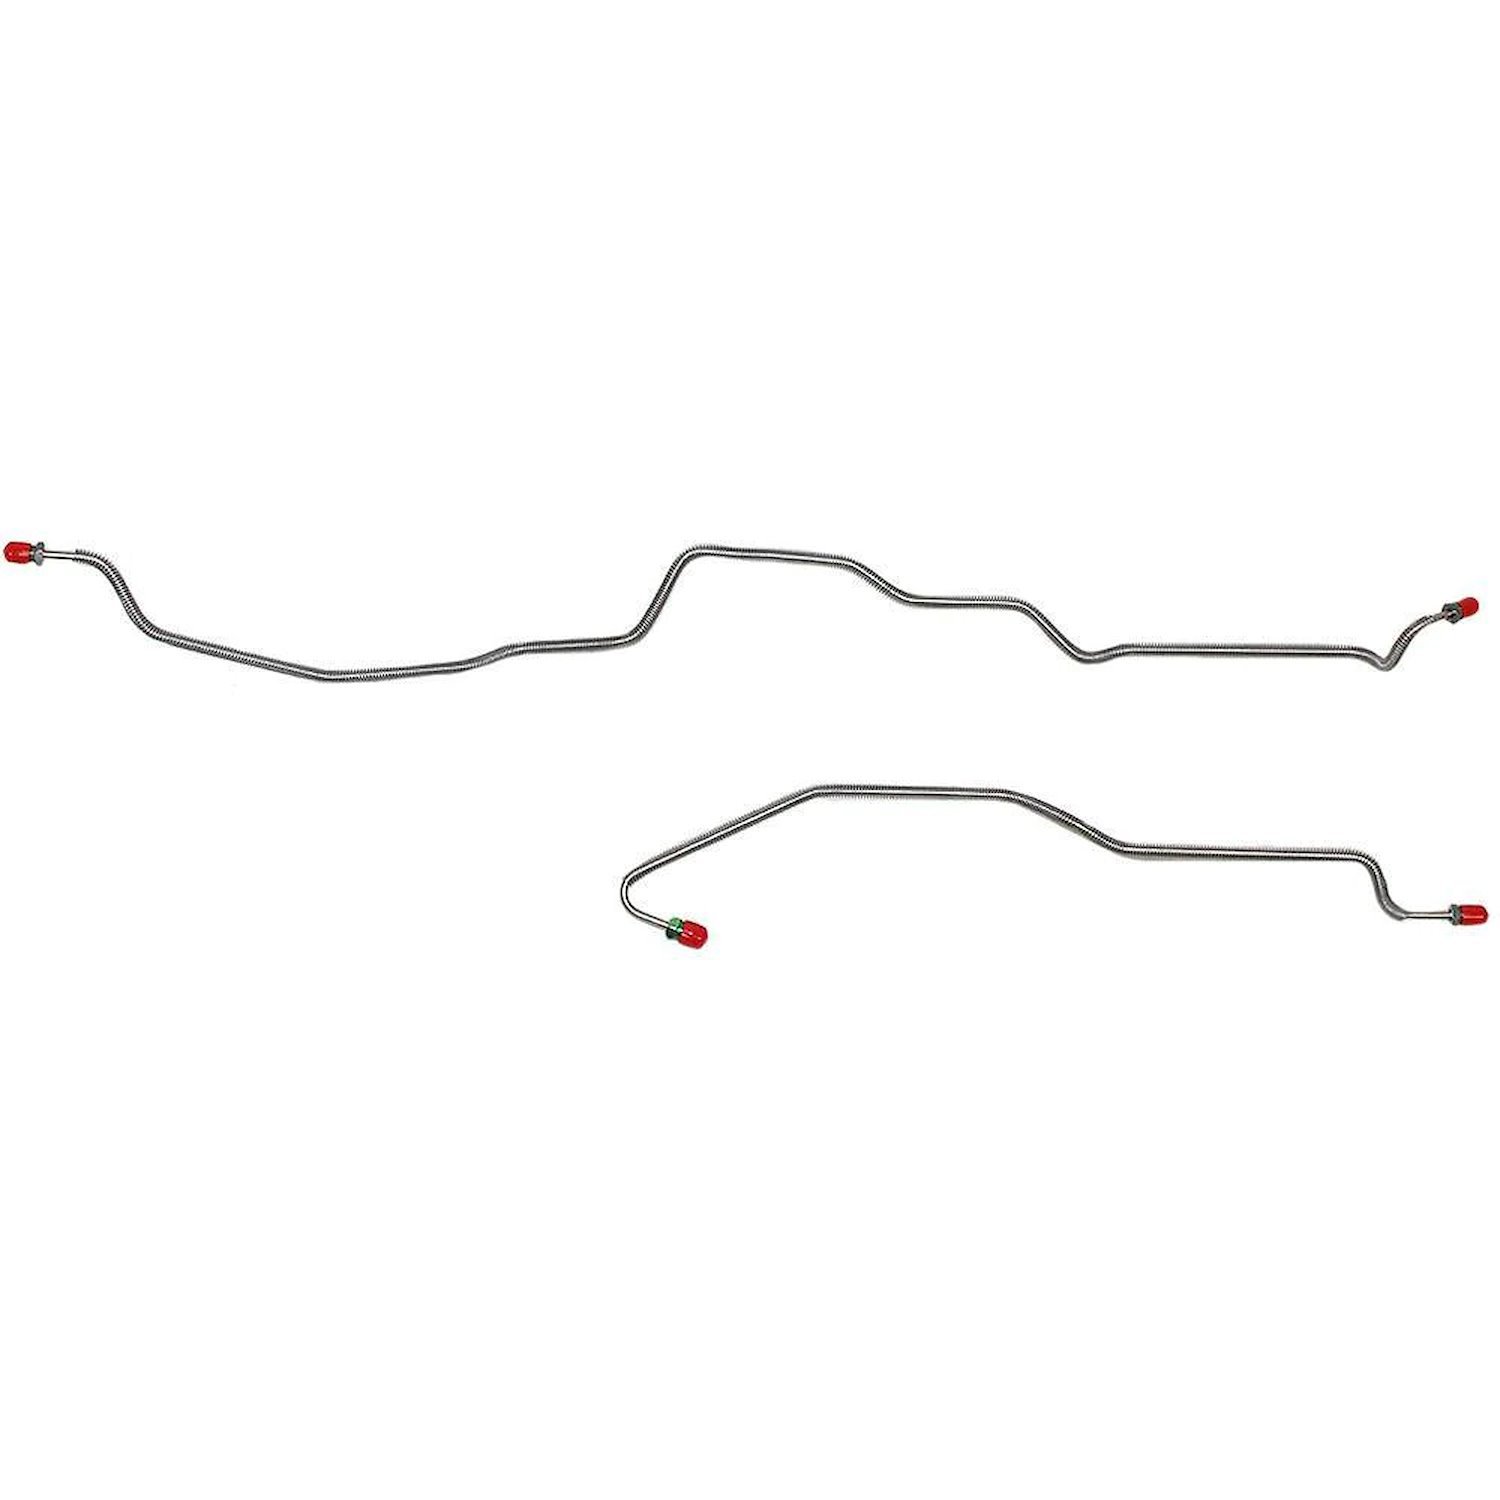 Rear Axle Brake Line Set for 1995-1997 Chevy Camaro, Pontiac Trans Am with Traction Control [2-PC, Stainless Steel]